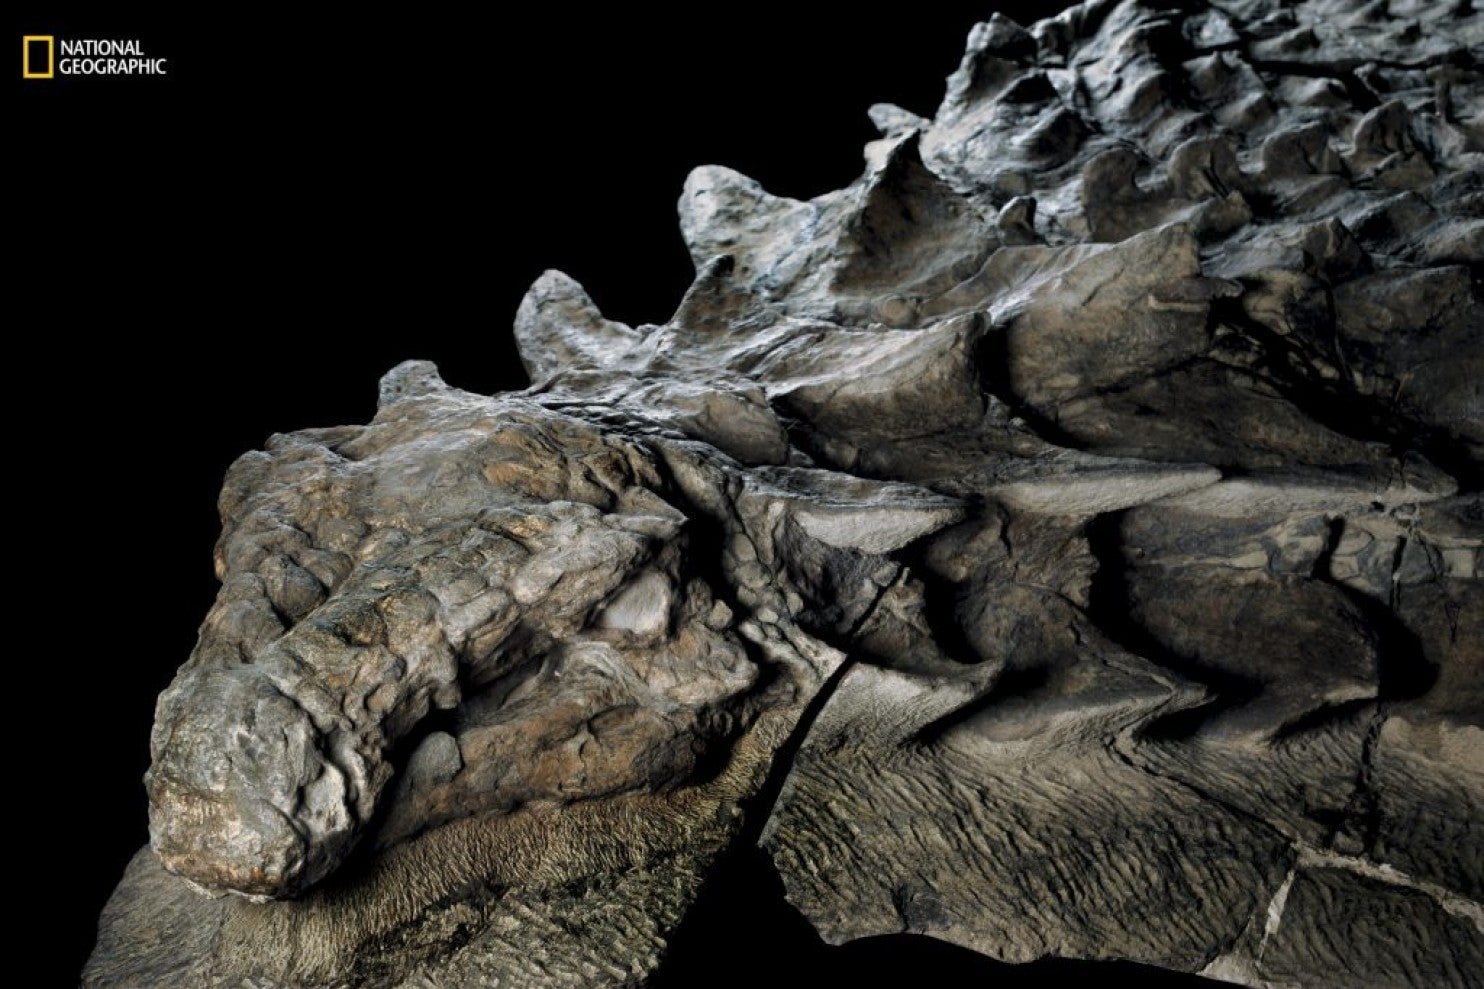 A close-up of the nodosaur fossil. The dinosaur’s head is clearly visible